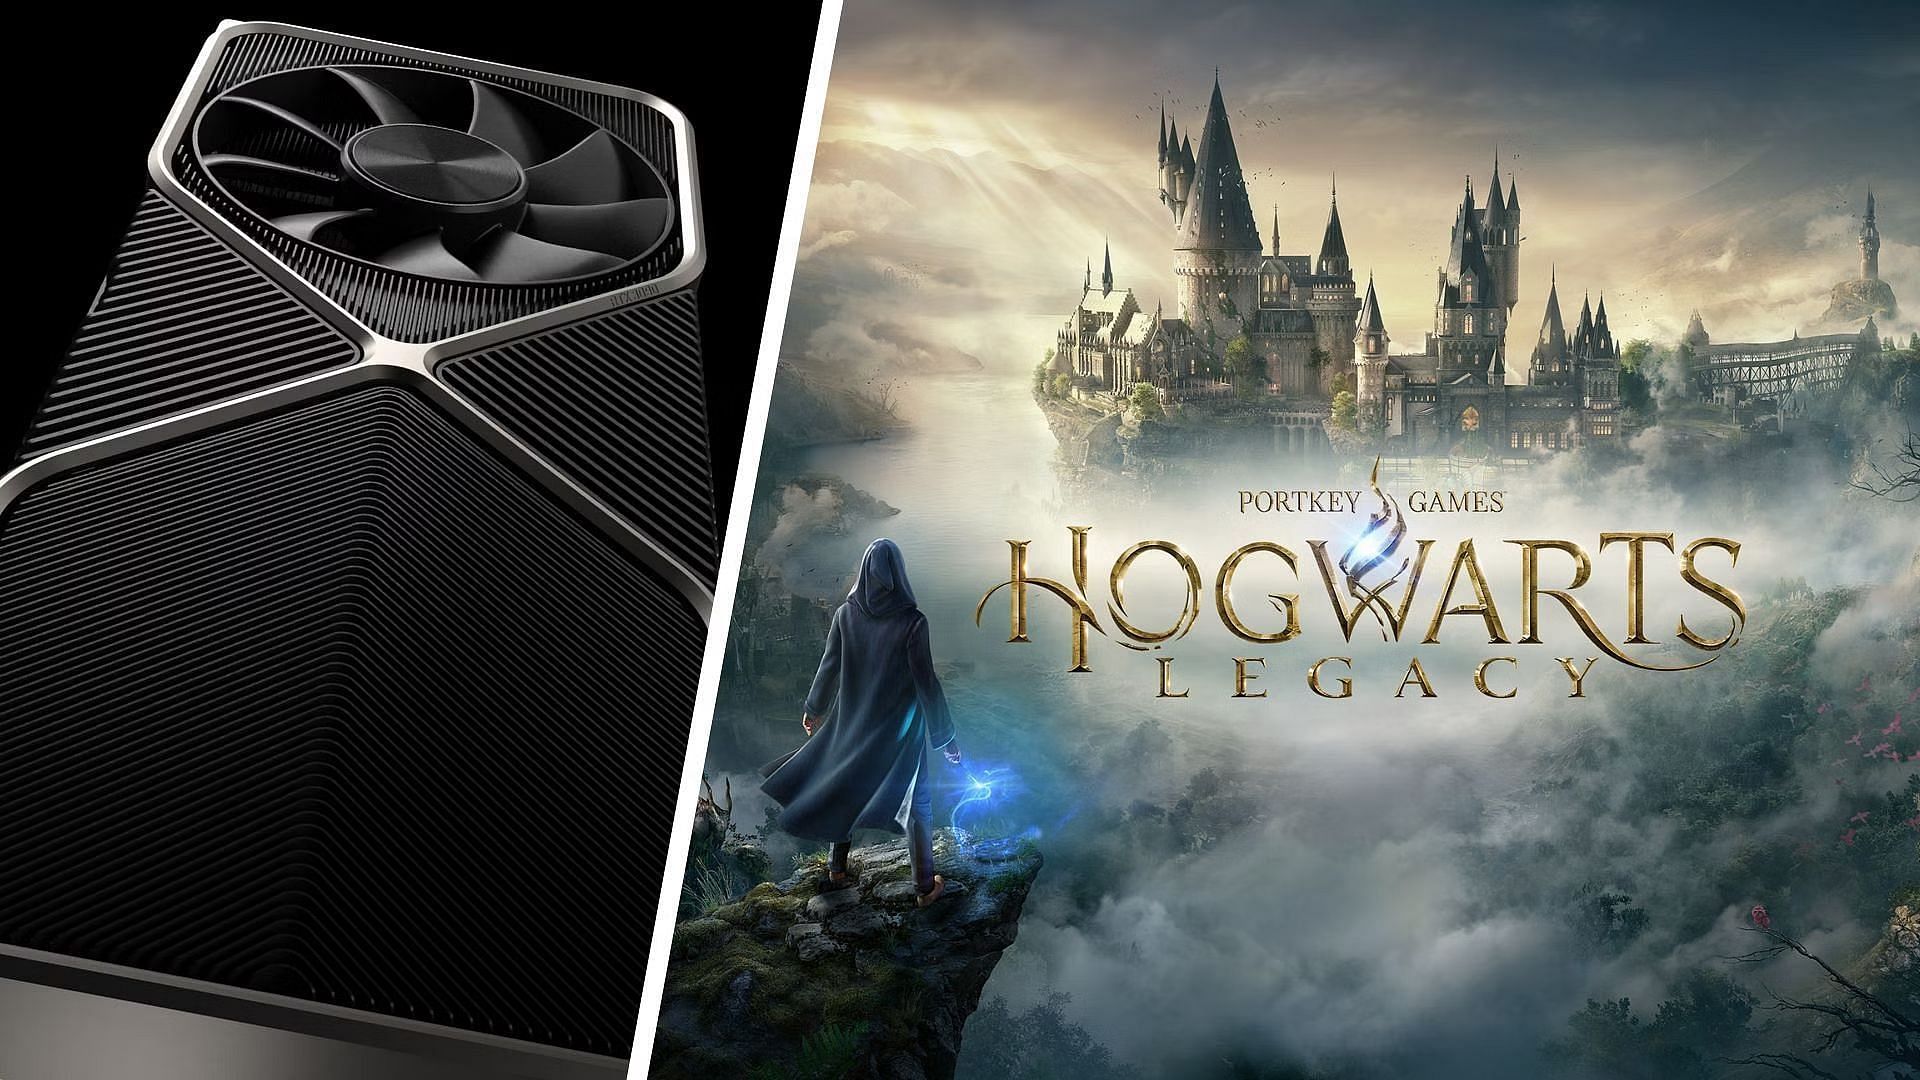 The RTX 3090 Ti and Hogwarts Legacy cover